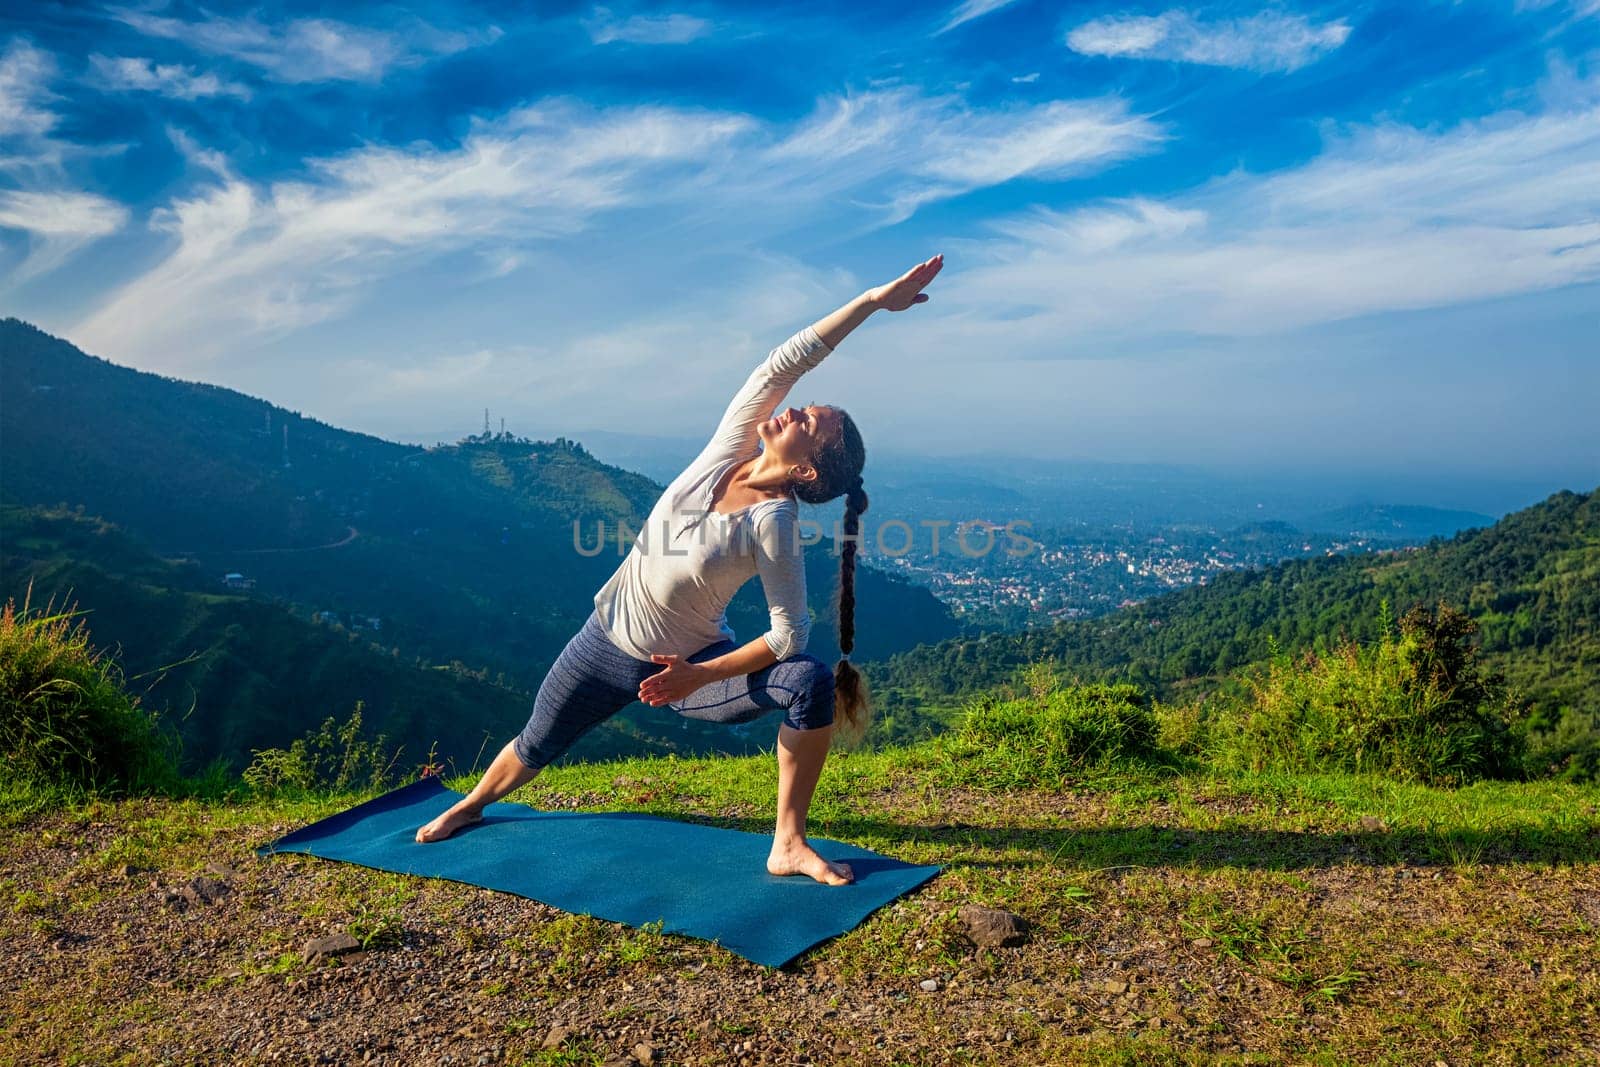 Woman practices yoga asana Utthita Parsvakonasana - extended side angle pose outdoors in mountains in the morning